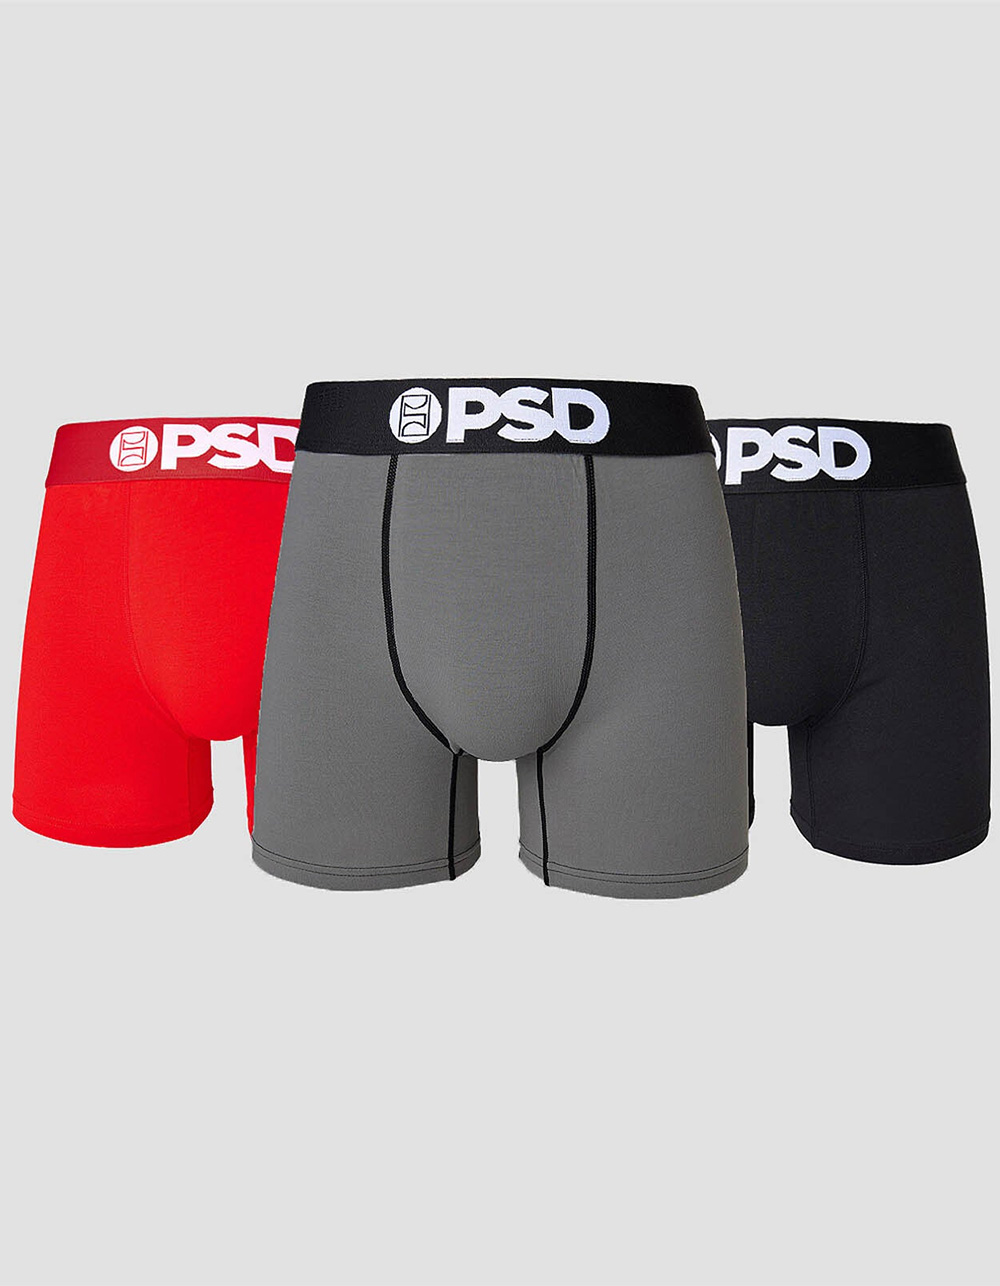 PSD Boxer Brief Multicolor Active Stretch Underwear Mens Size X-Large Pack  Of 3